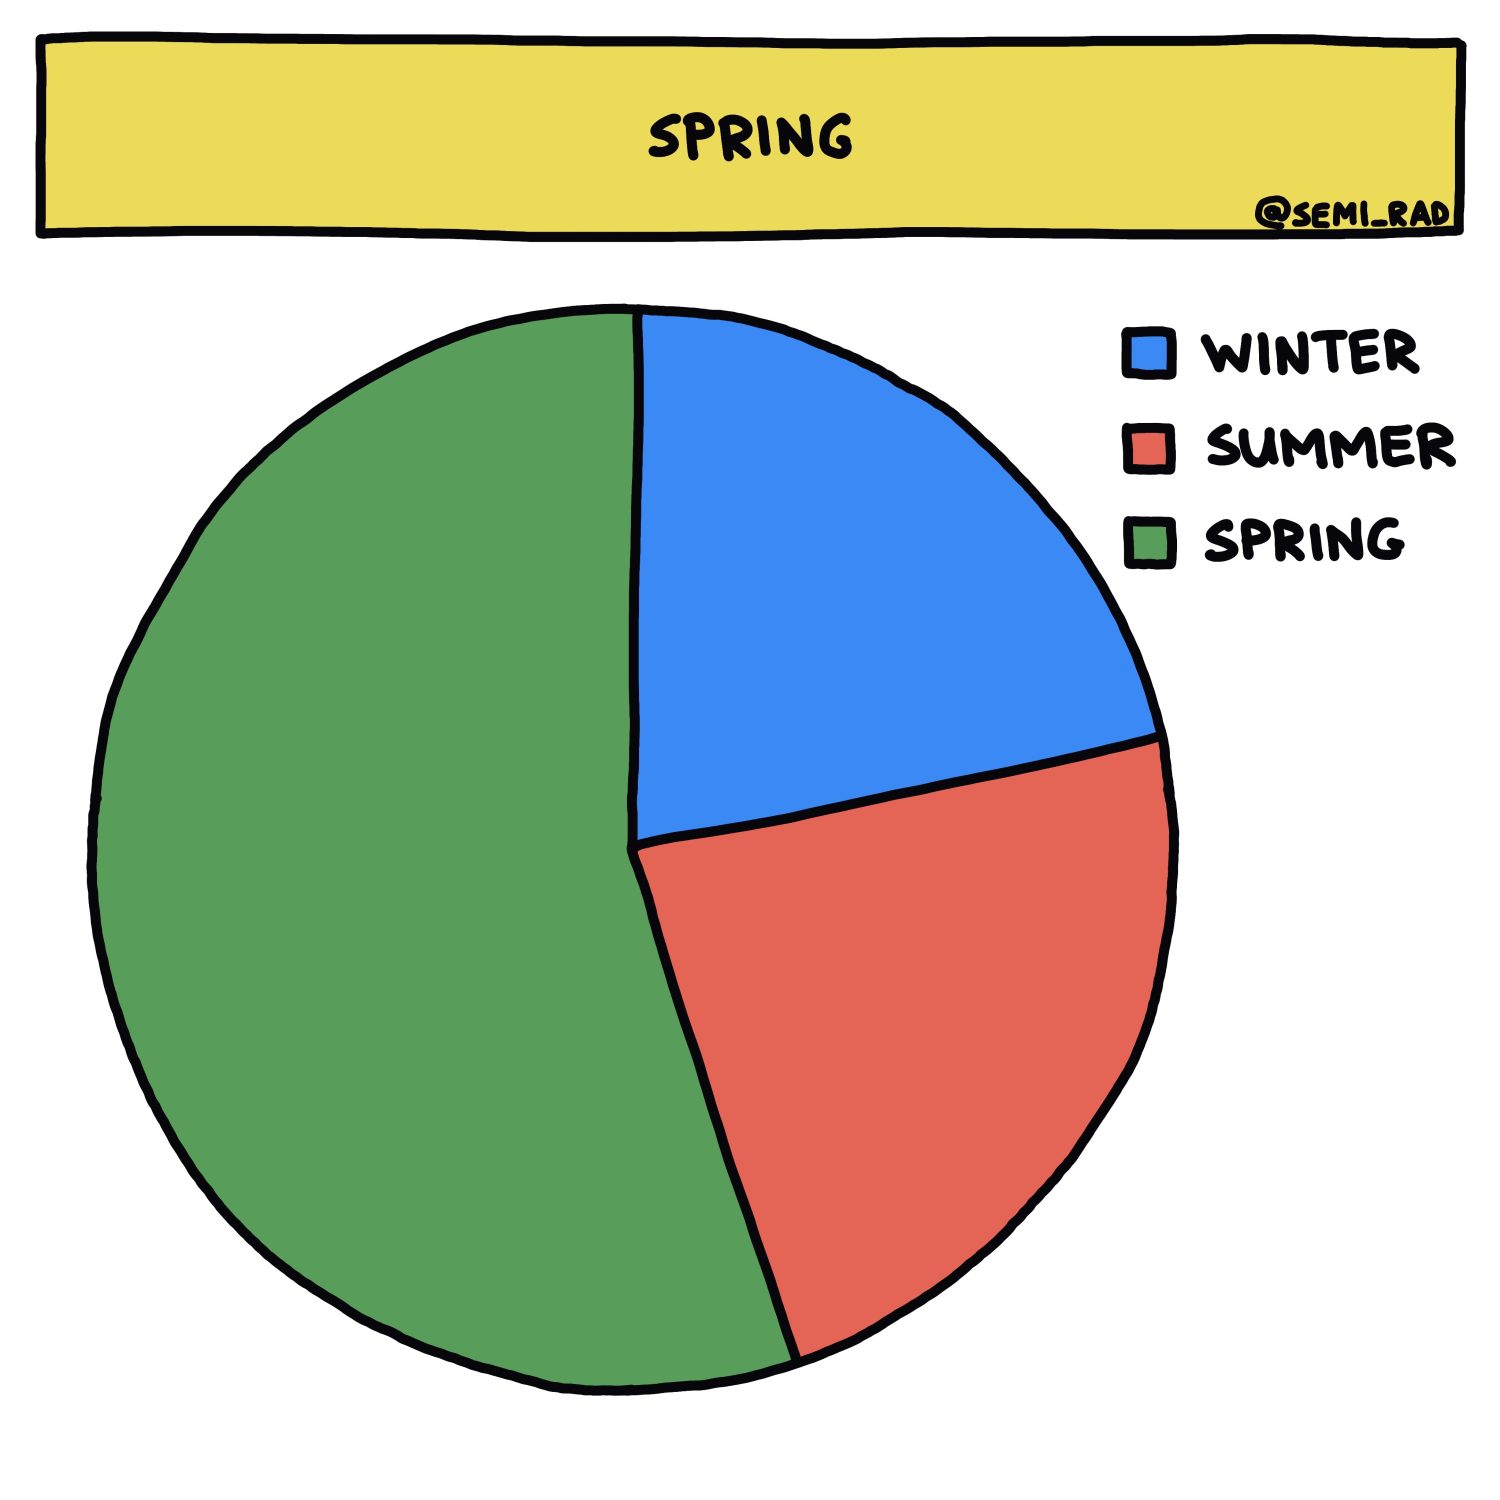 hand-drawn pie chart titled "Spring" with three parts: winter, summer, and spring